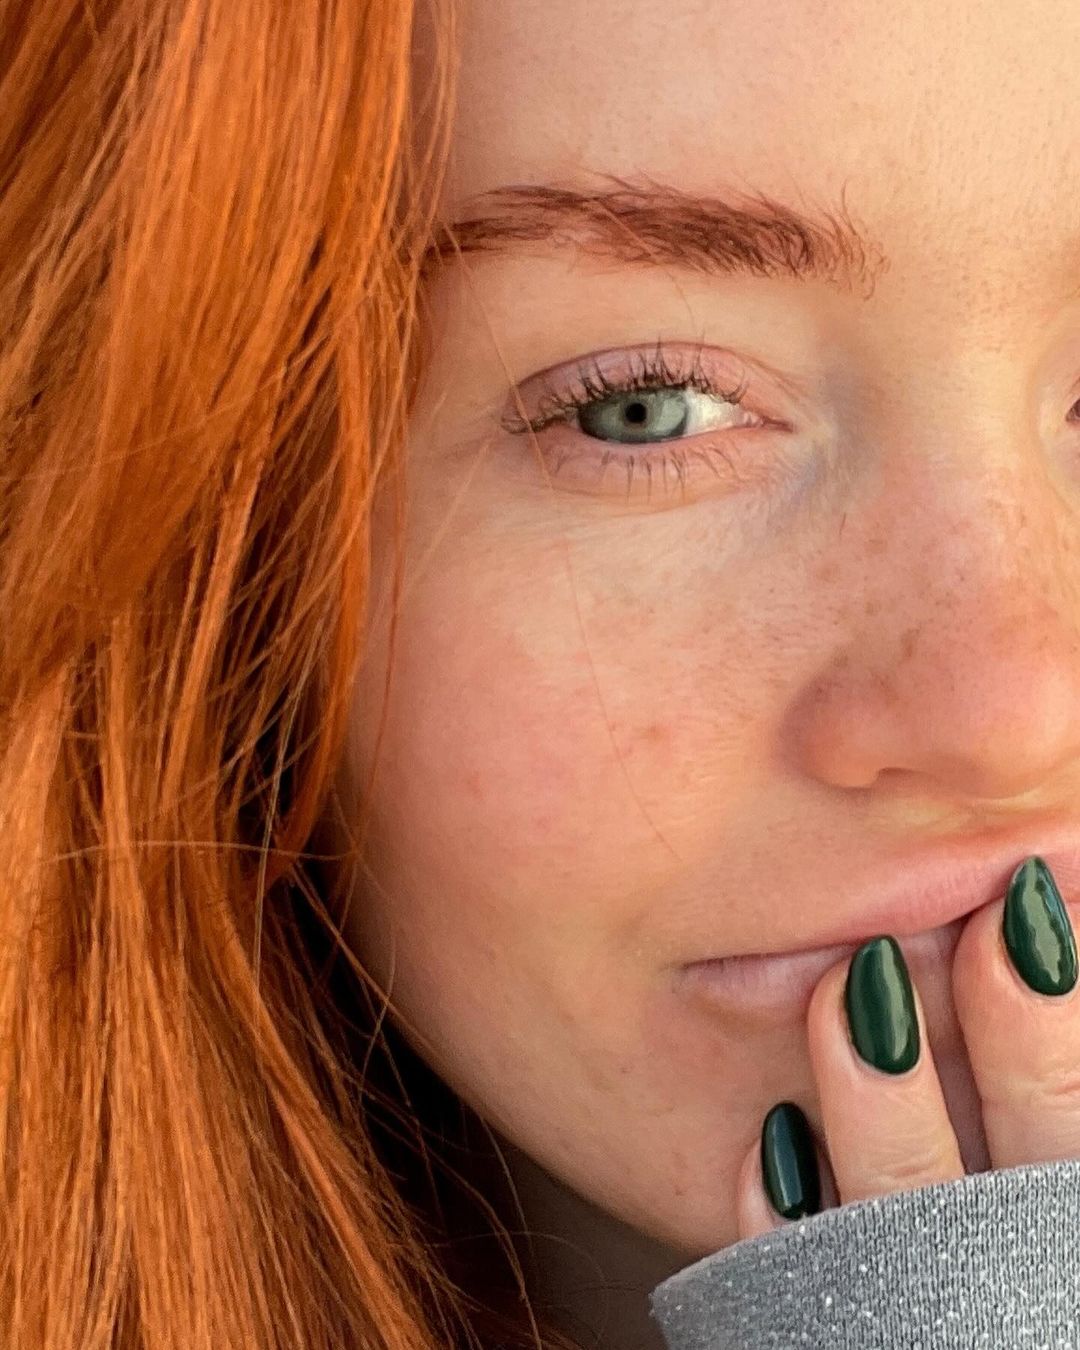 A portrait of a woman with striking red hair and green eyes